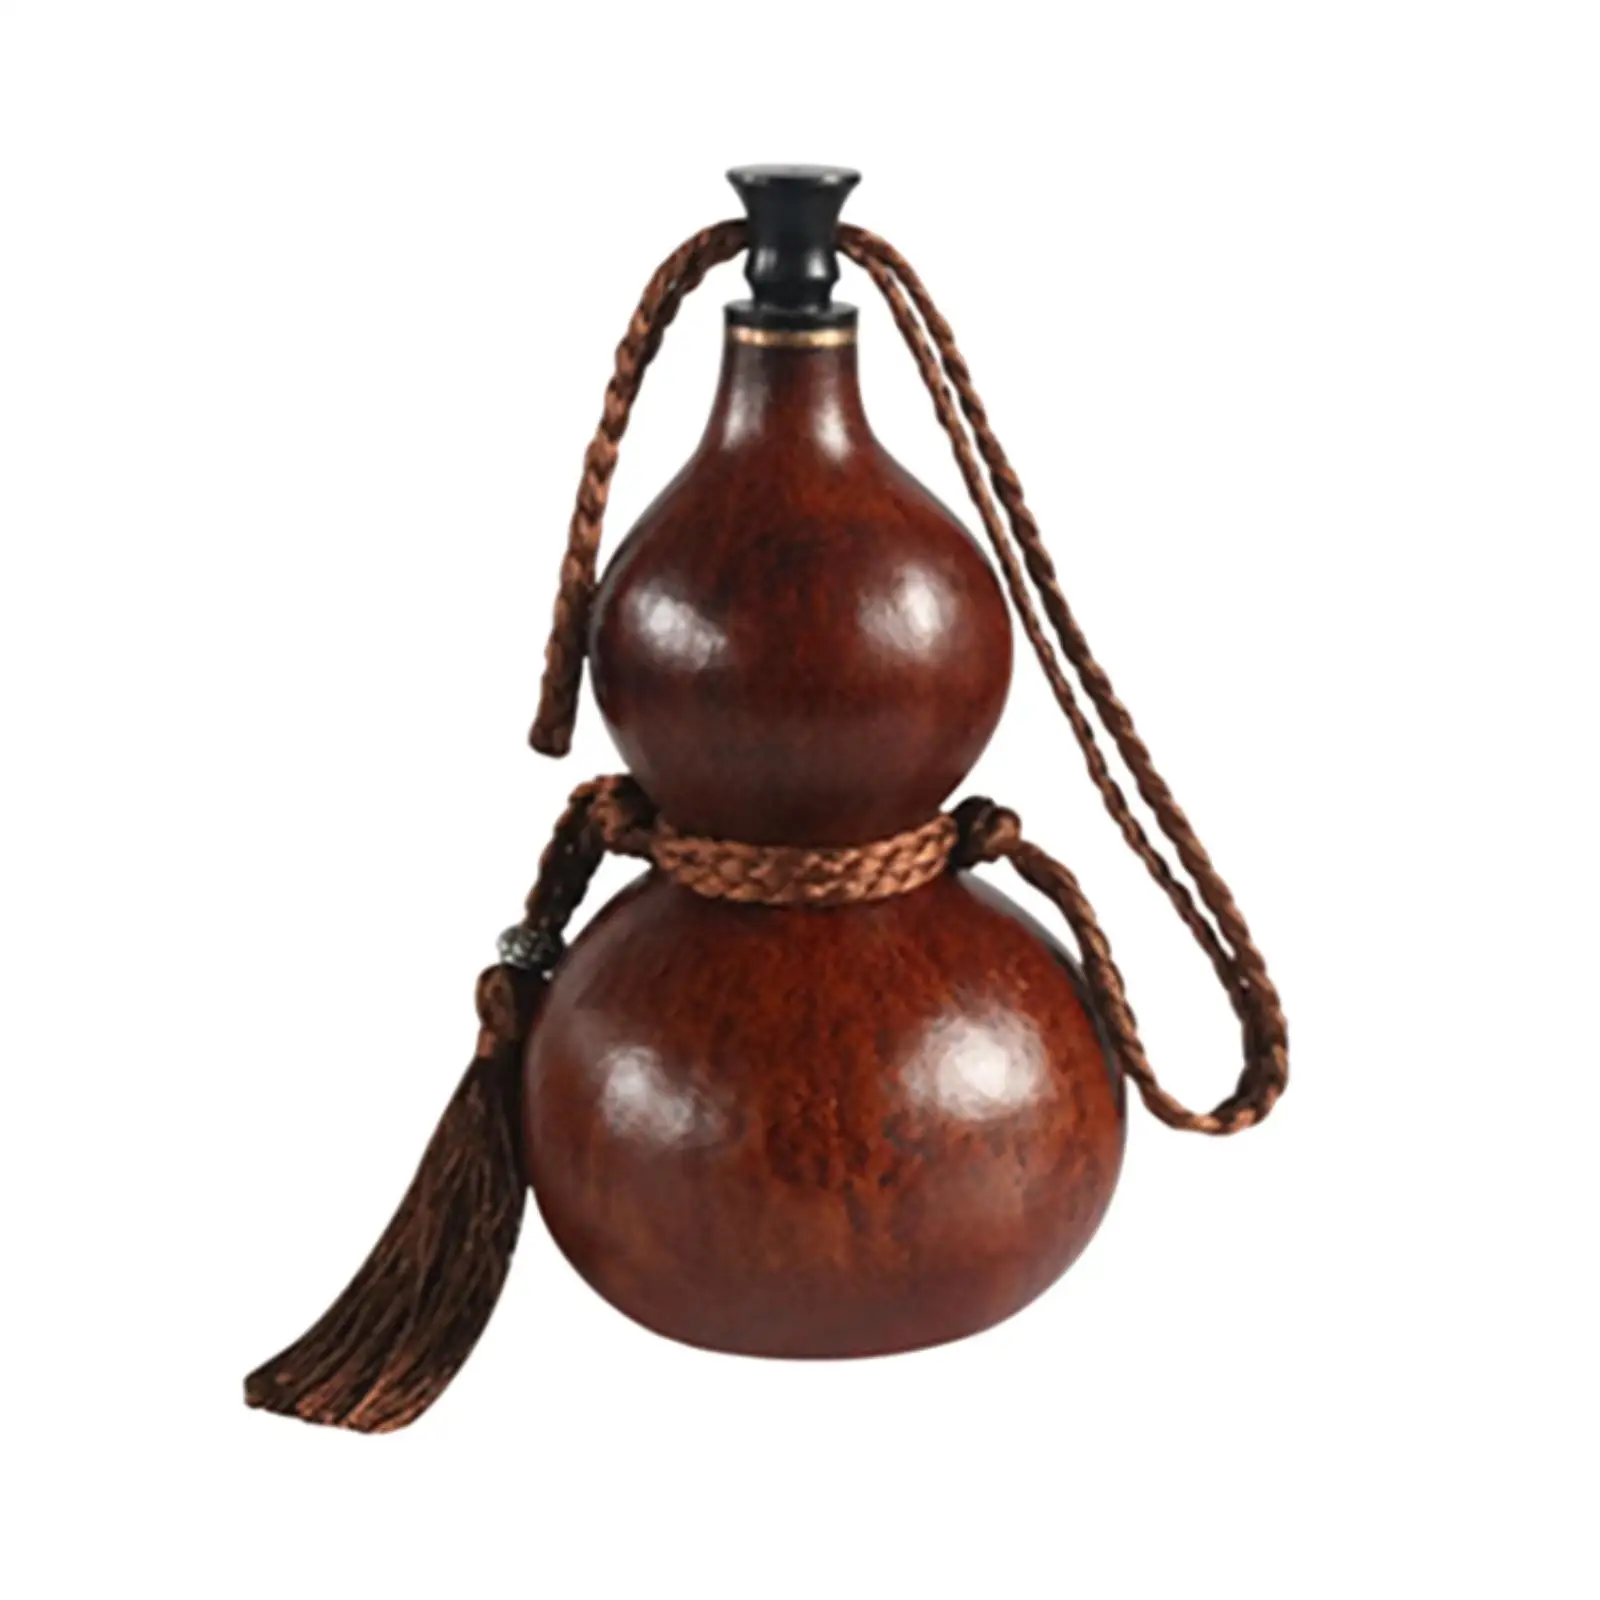 Portable Water Bottle Gourd Outdoor Activities Dried Gourd Flasks for Outdoor, Travel Fishing Storing Drinks and Water Decor